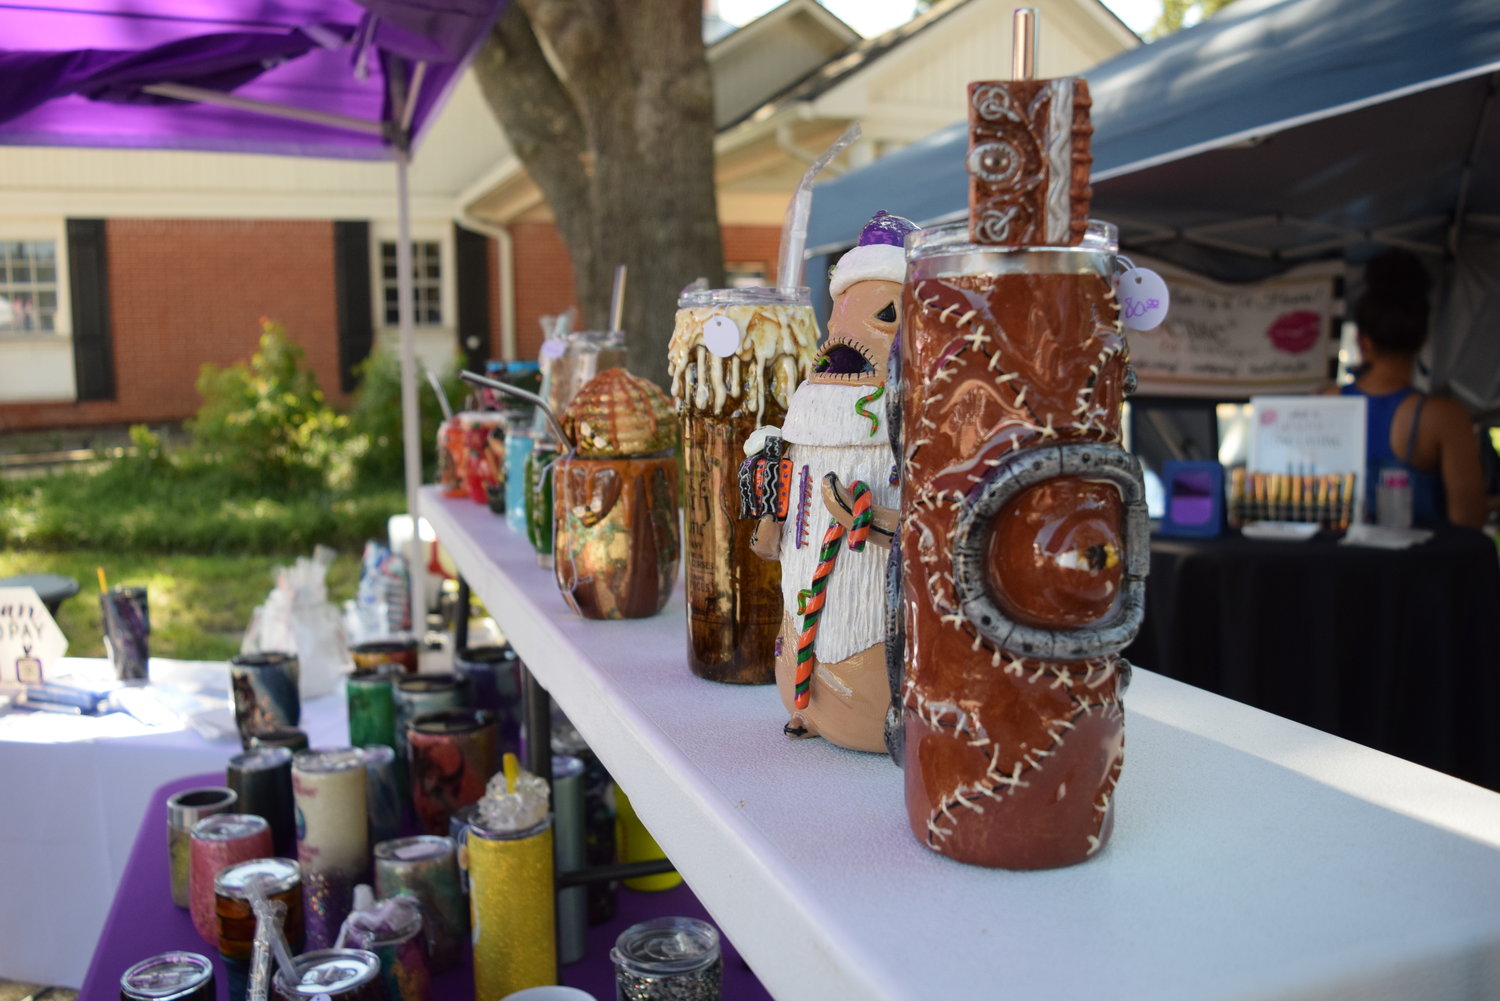 Vendors brought a variety of unique items such as these handmade drinking vessels.